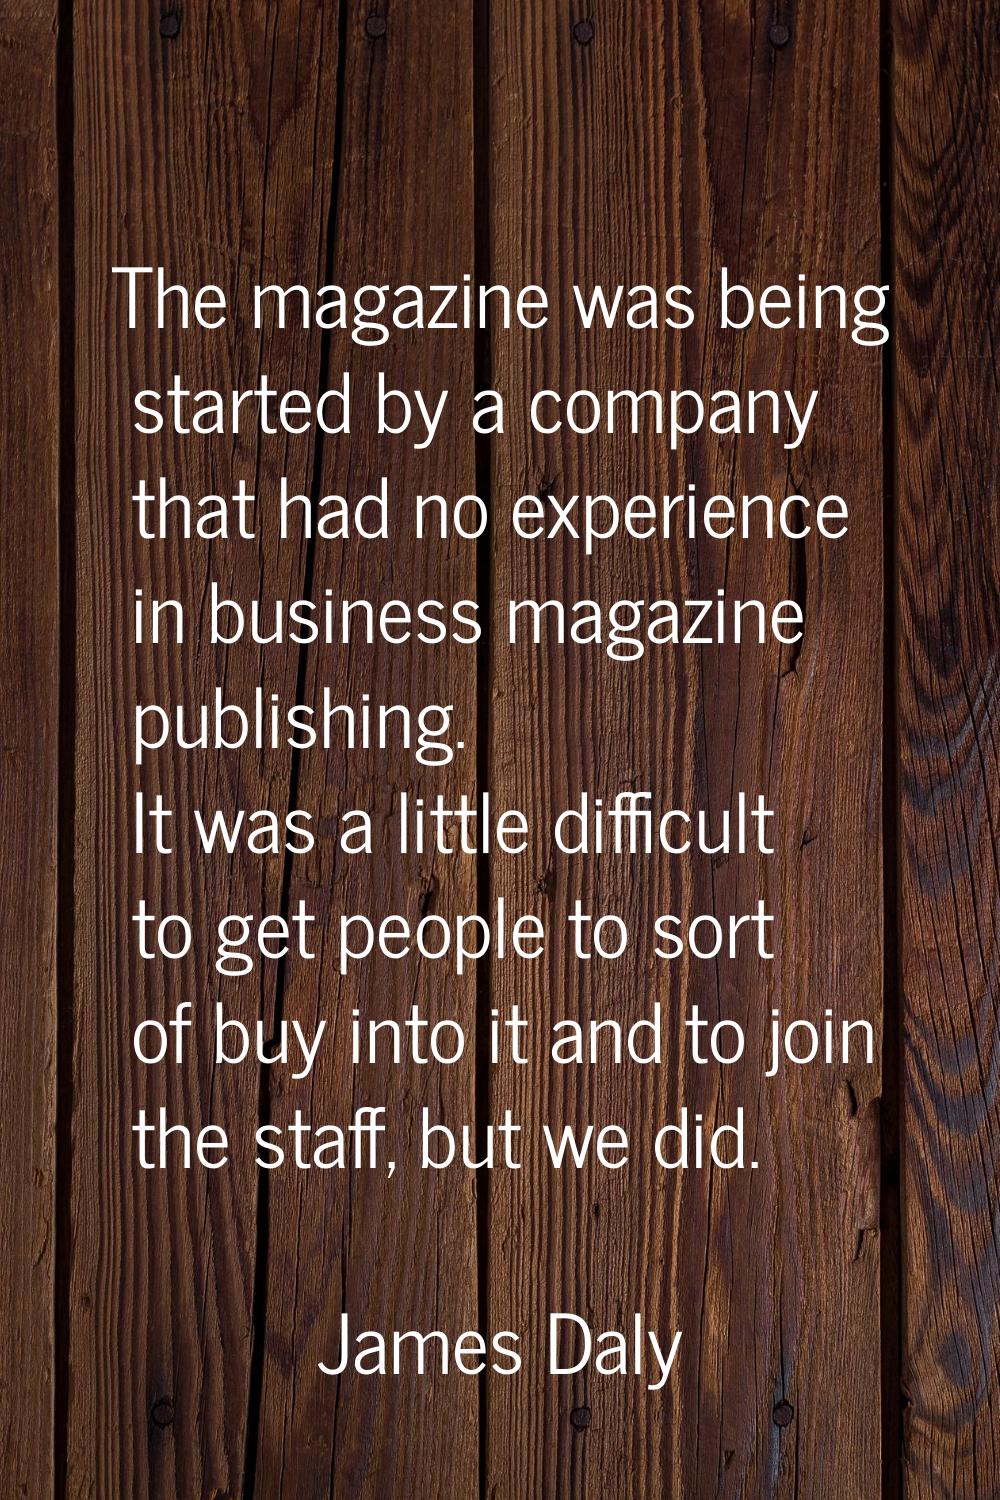 The magazine was being started by a company that had no experience in business magazine publishing.